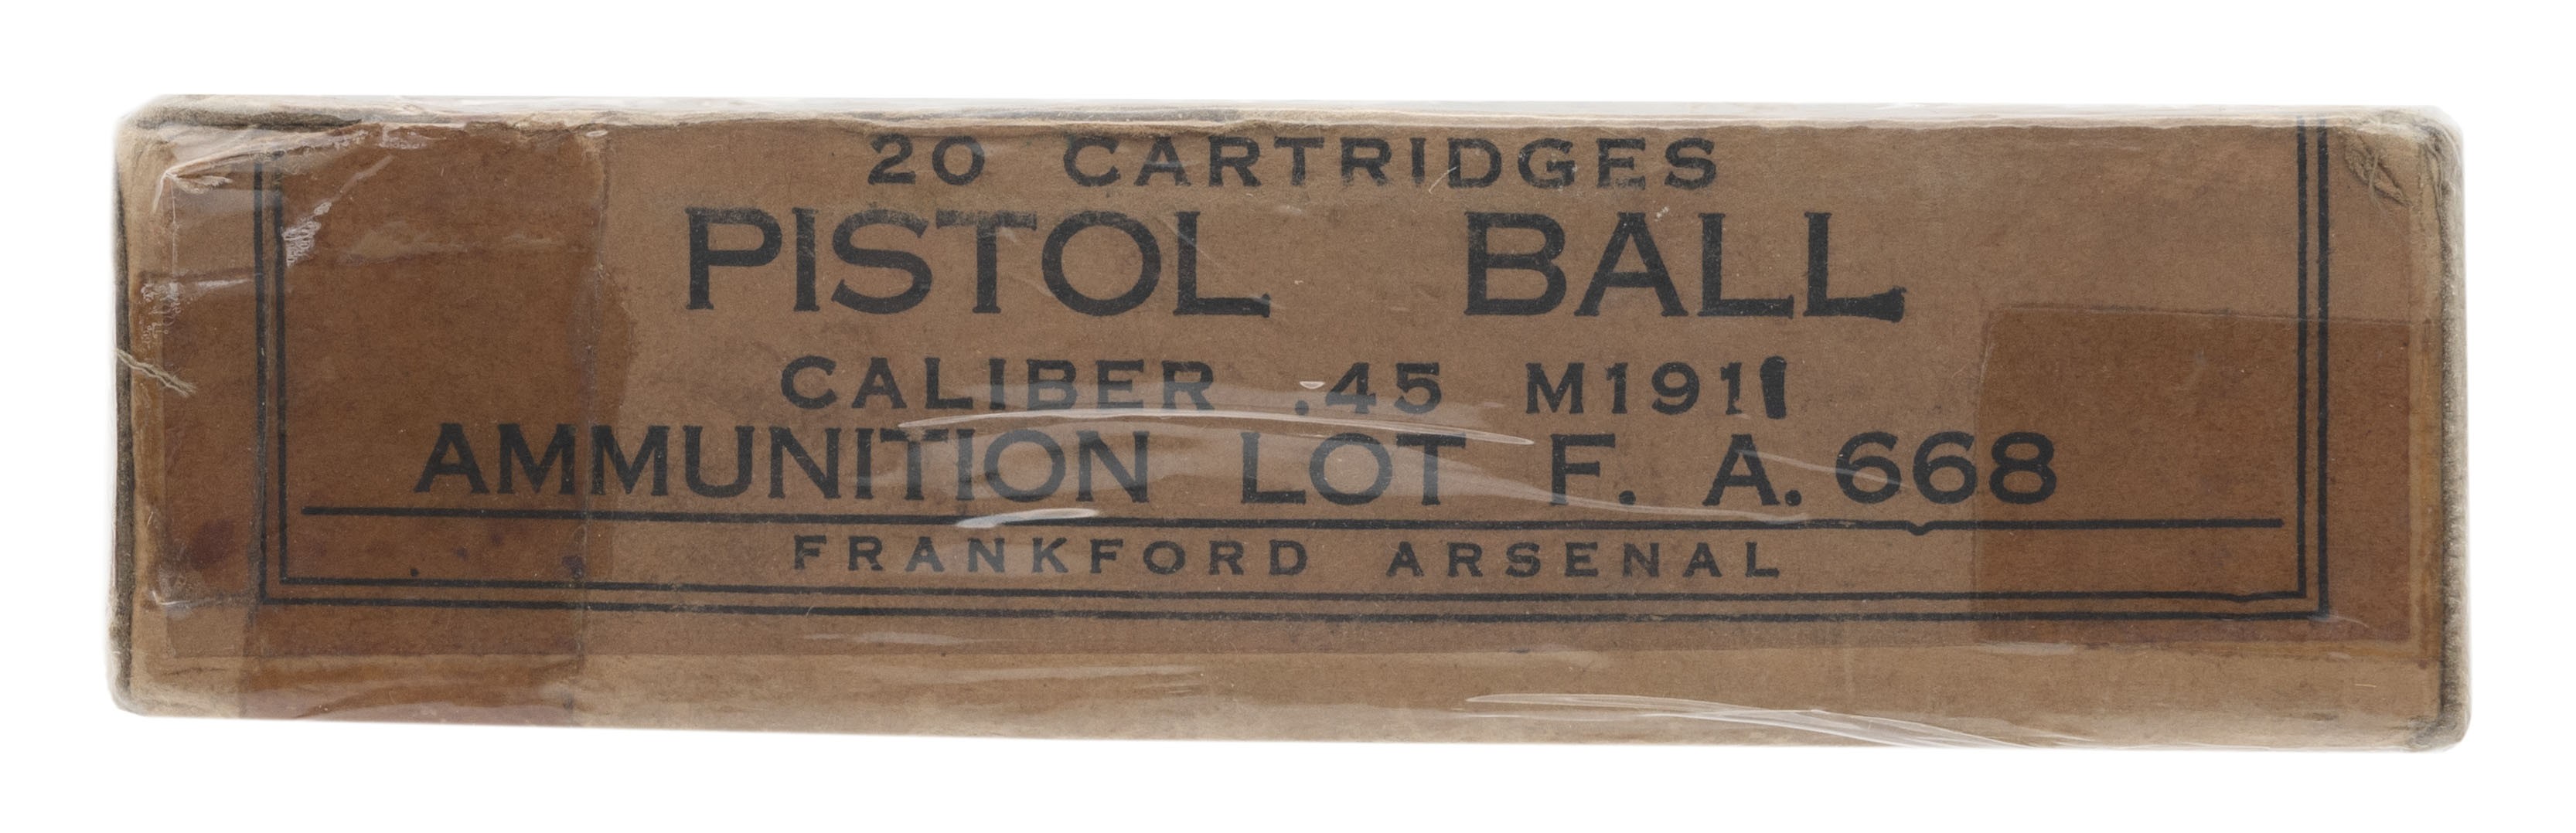 45 Caliber M 1911 Pistol Ball Cartridges by Frankford Arsenal (AN174) for  sale